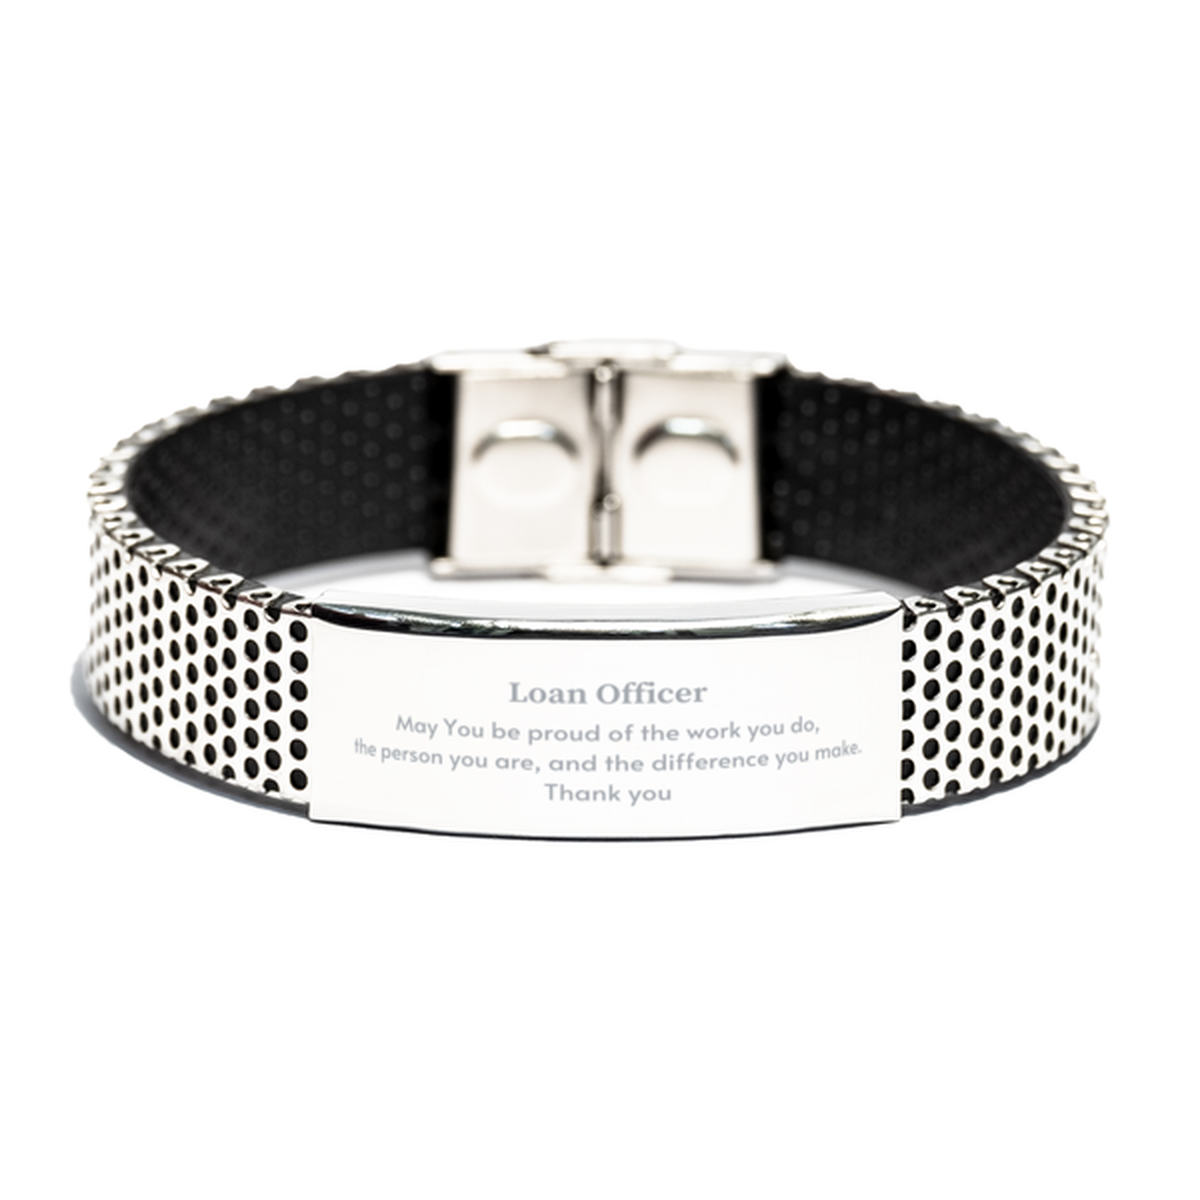 Heartwarming Stainless Steel Bracelet Retirement Coworkers Gifts for Loan Officer, Loan Officer May You be proud of the work you do, the person you are Gifts for Boss Men Women Friends